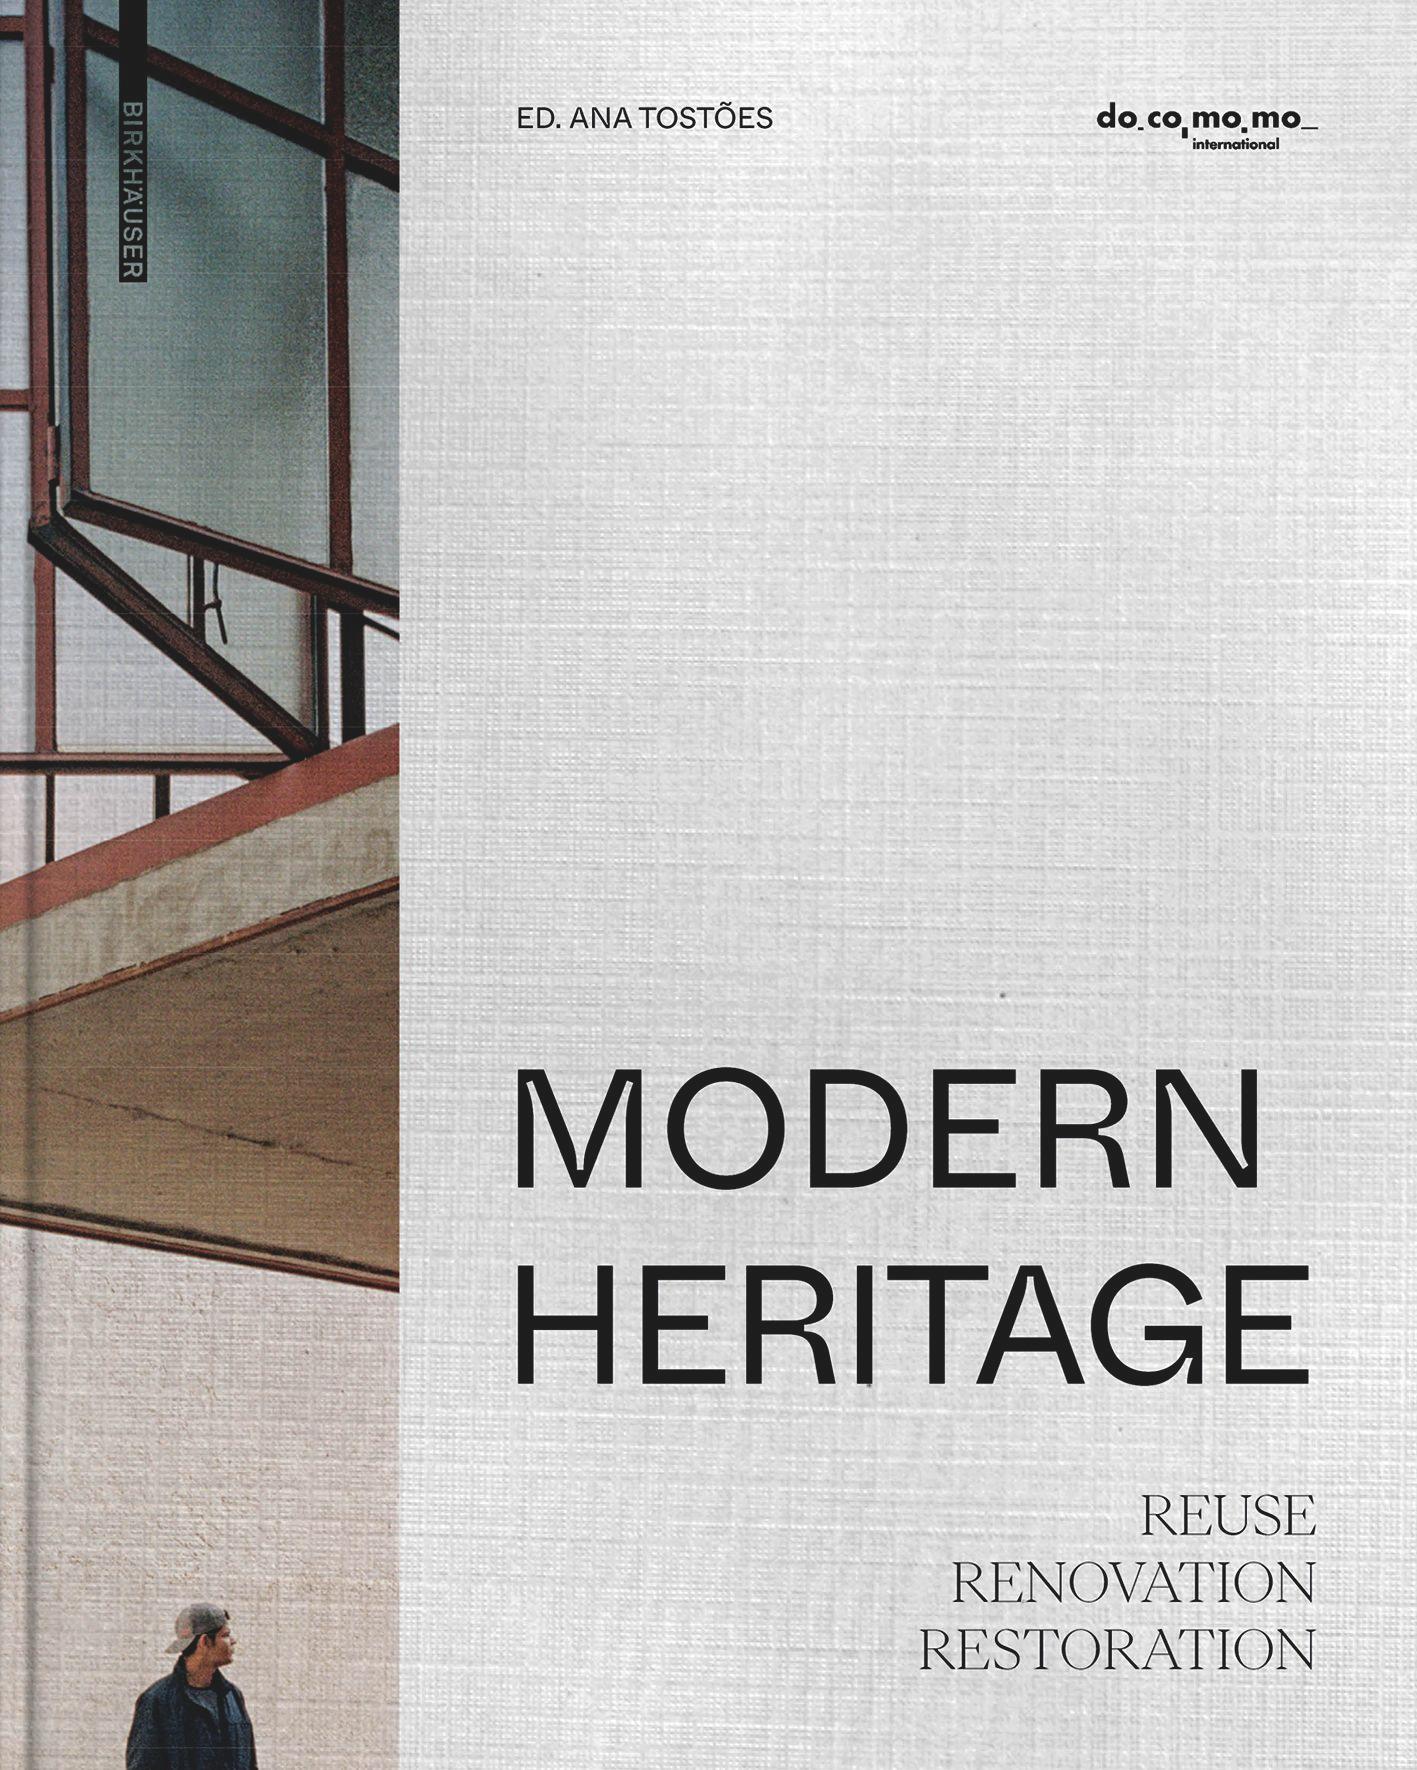 Modern Heritage's cover